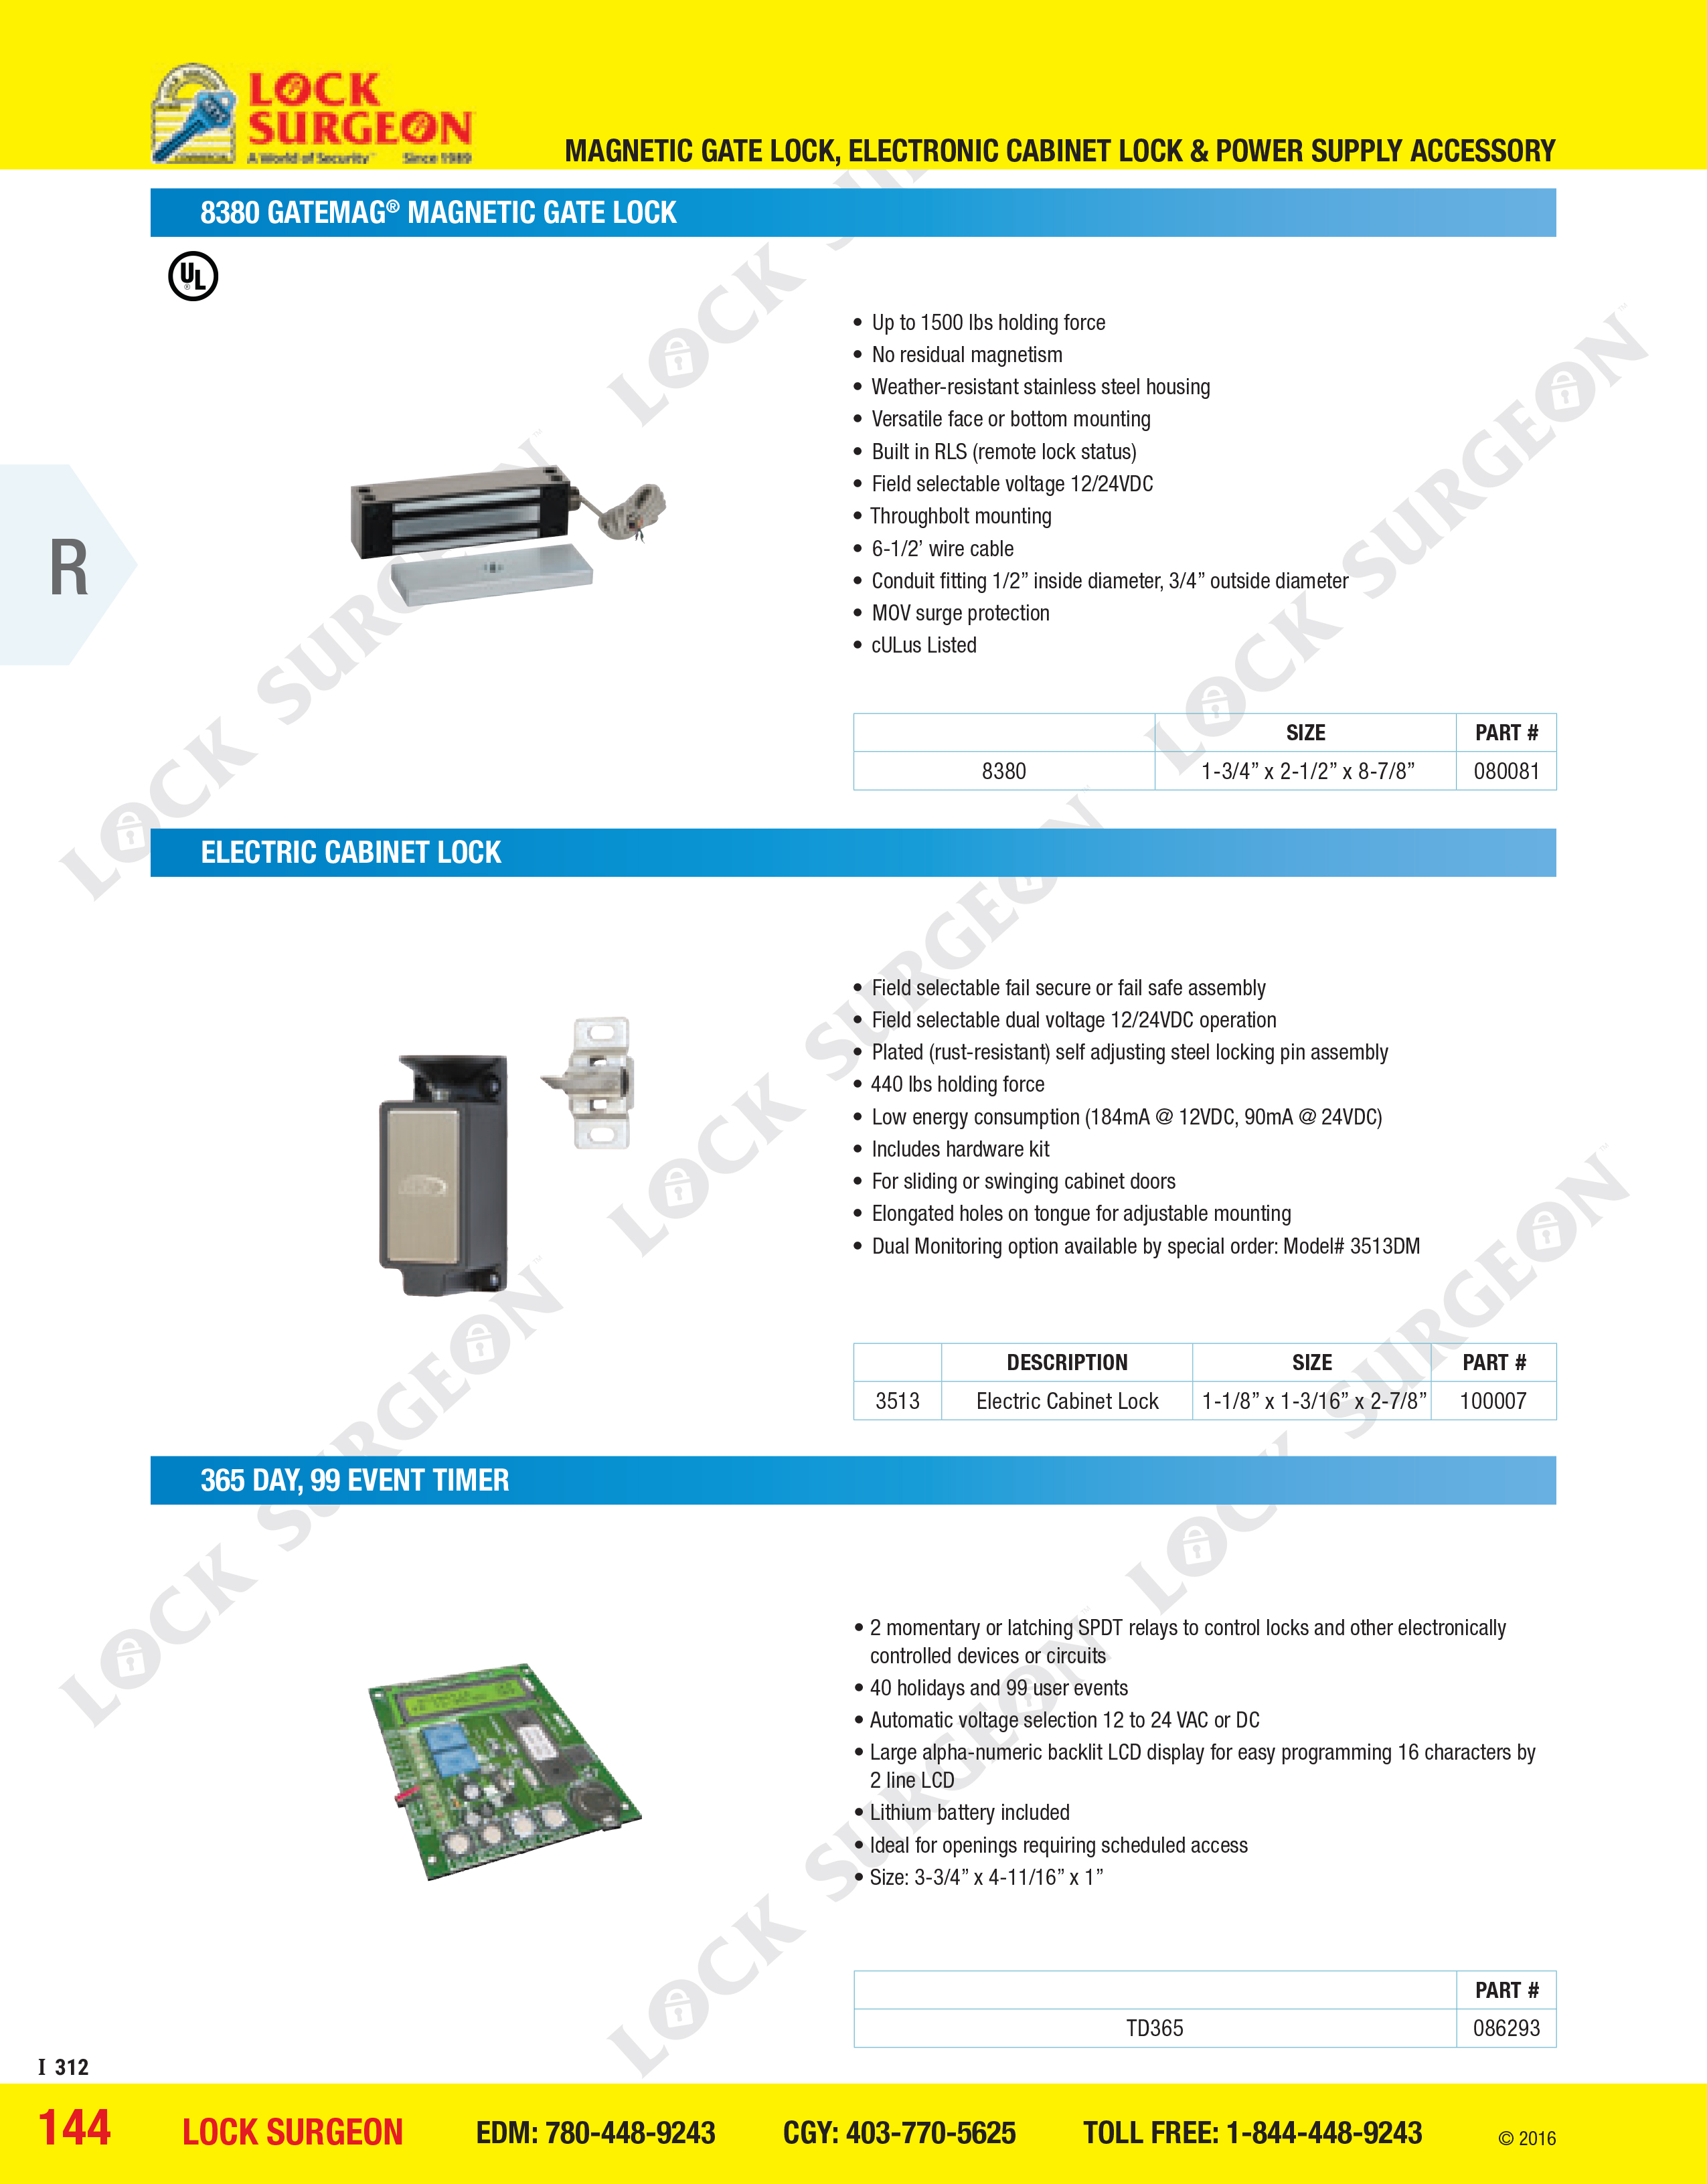 Acheson Magnetic Gate Lock, Electronic Cabinet Lock and Power Supply Accessory.